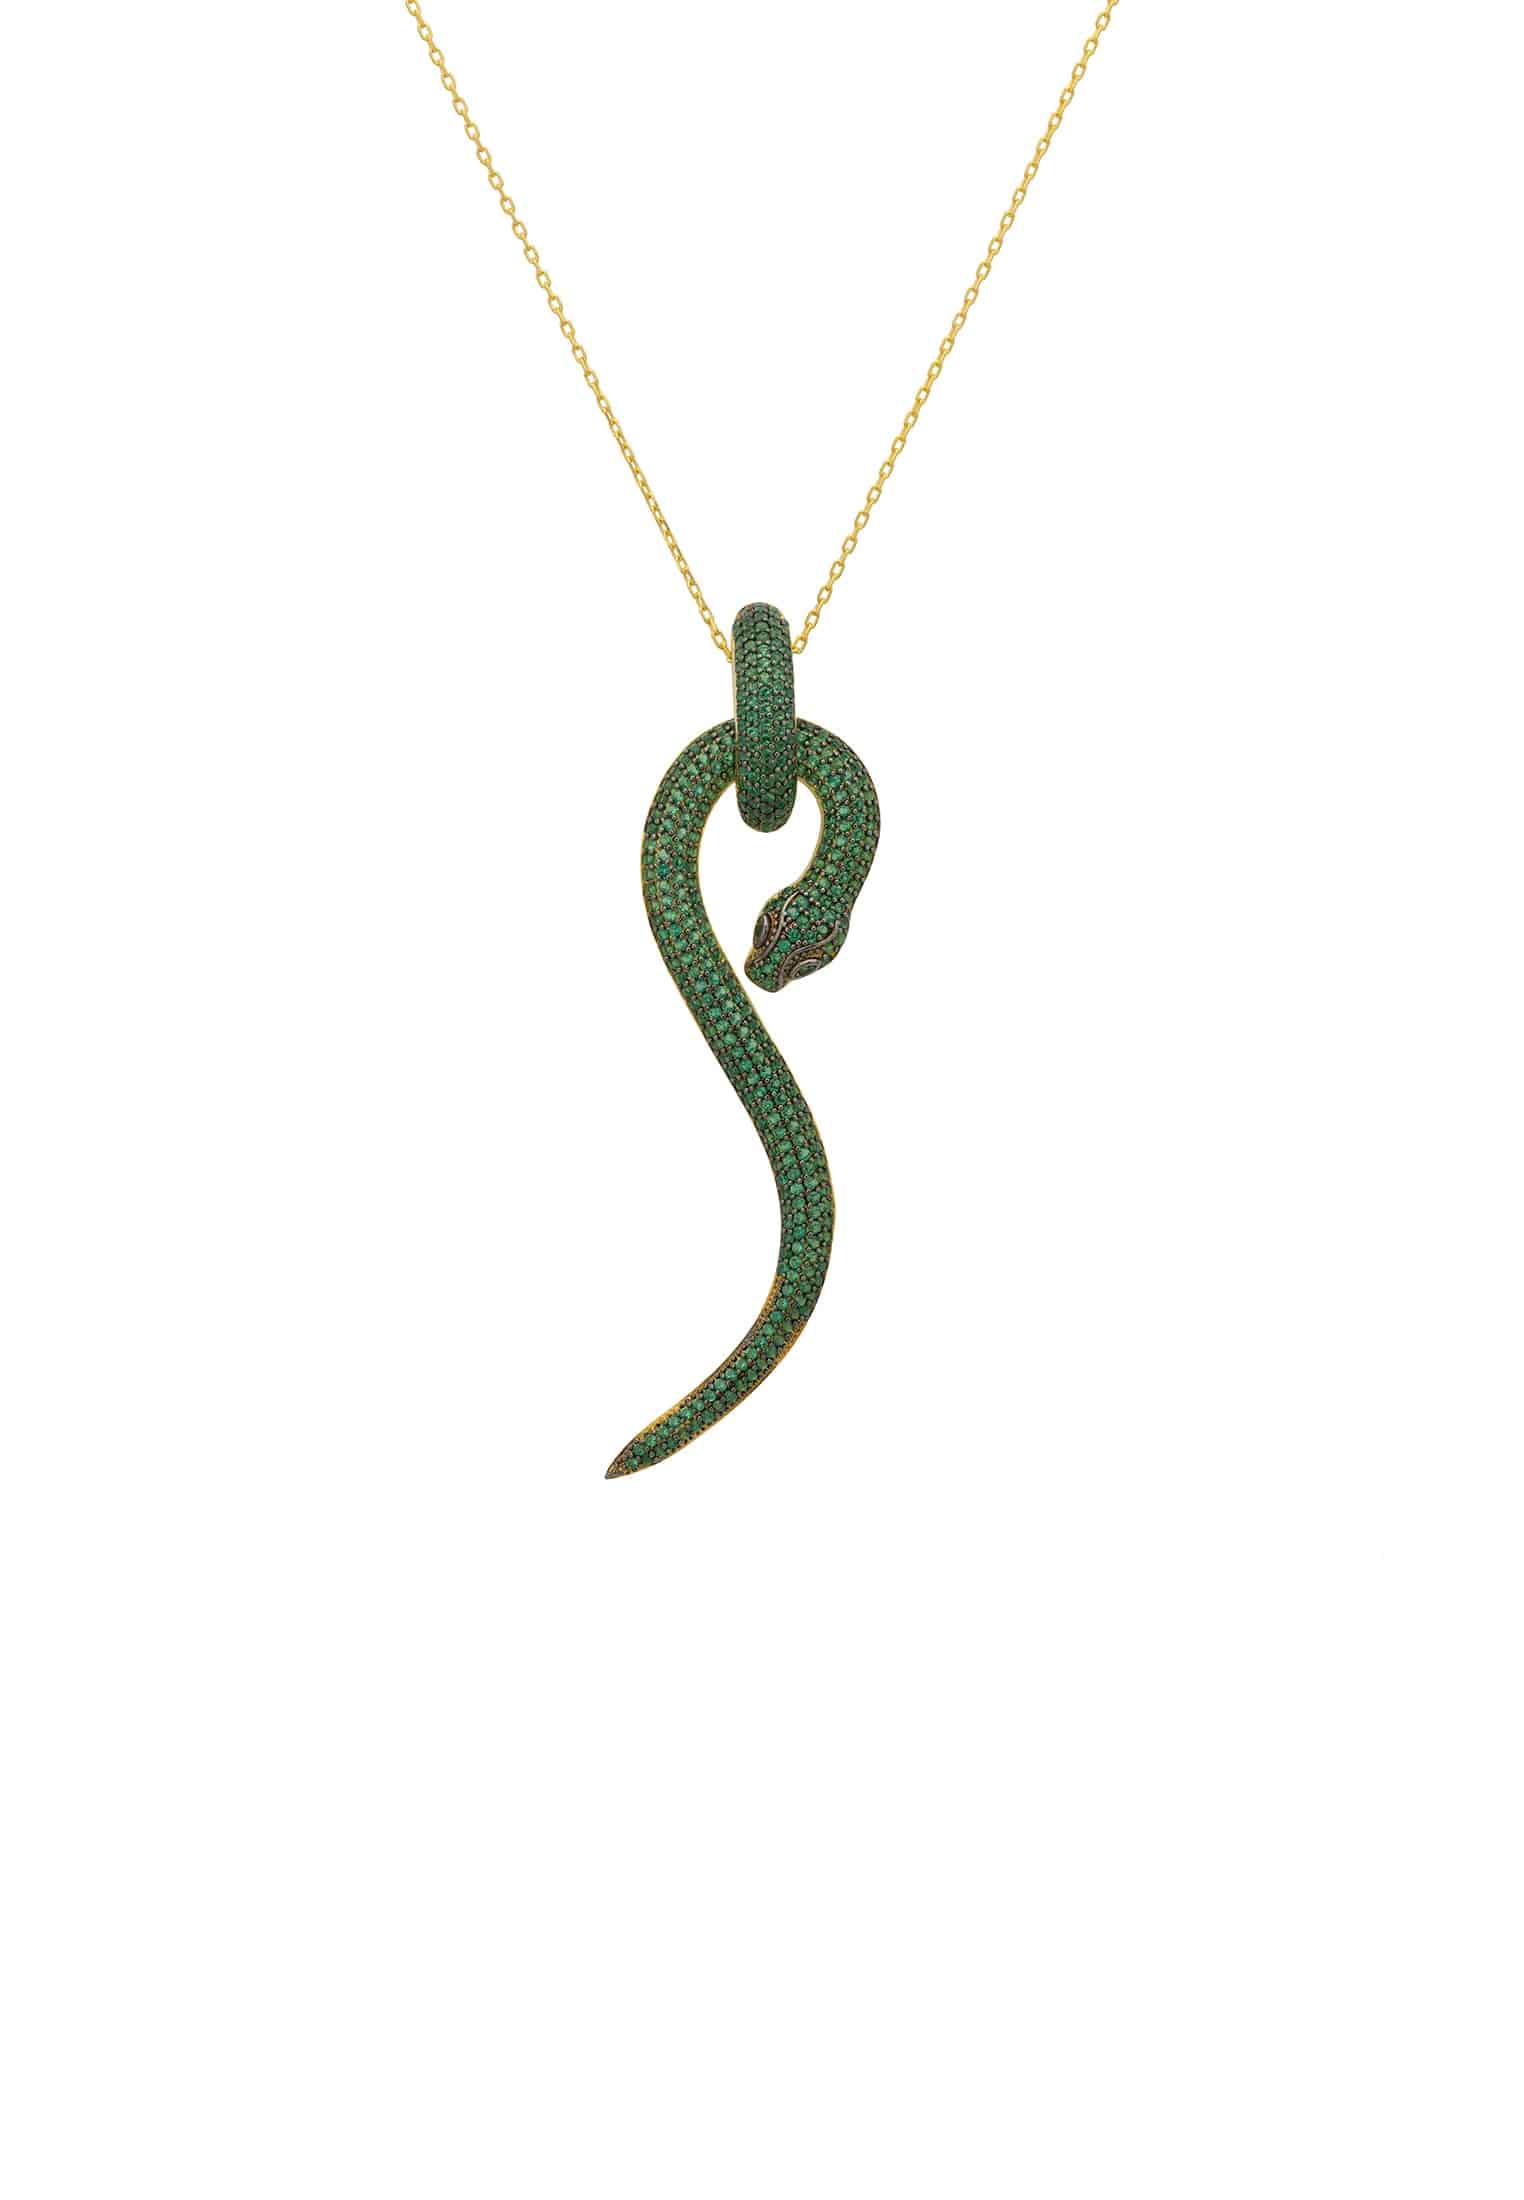 Gold Anaconda Pendant Necklace with Emerald Zircons - Animal Inspired Jewelry for Day and Night Bijou Her